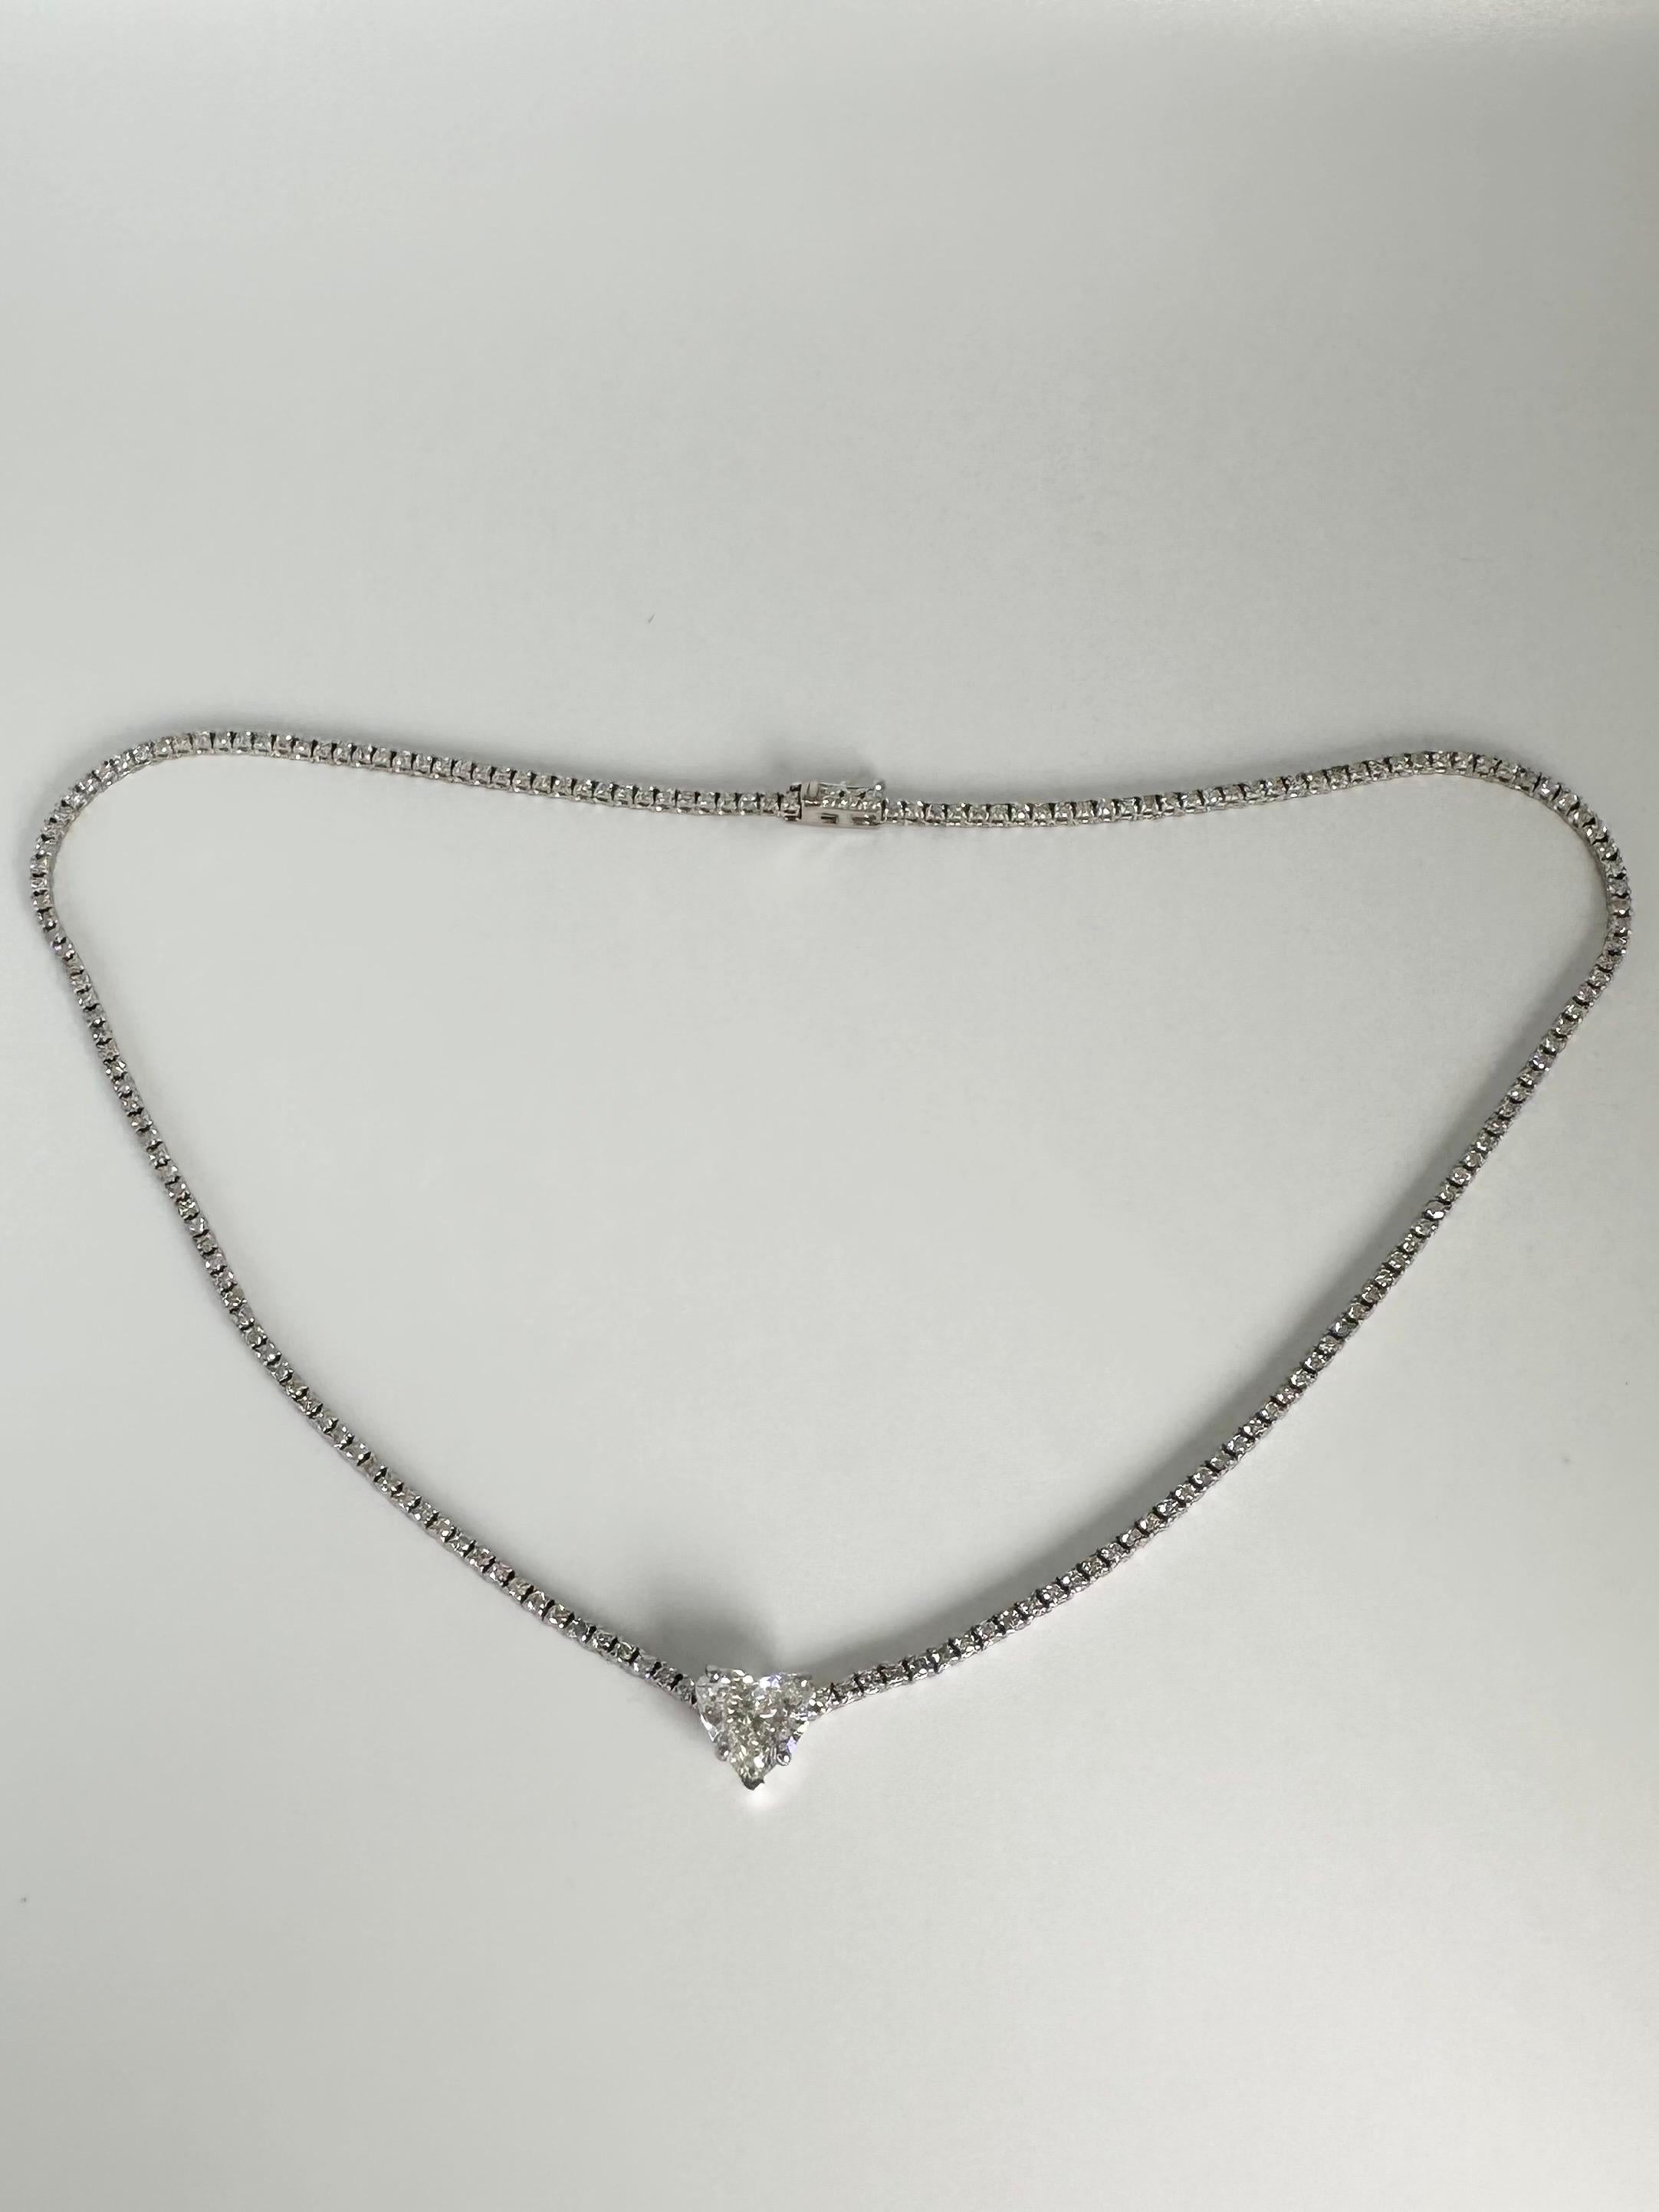 Fantastic workmanship, a beautiful elegant luxurious diamond tennis necklace with a large 3ct heart center, made in 18KT white gold with top quality diamonds and workmanship!

GOLD: 18KT gold
NATURAL DIAMOND(S)
Clarity/Color: VS/F
Carat:3ct (GIA